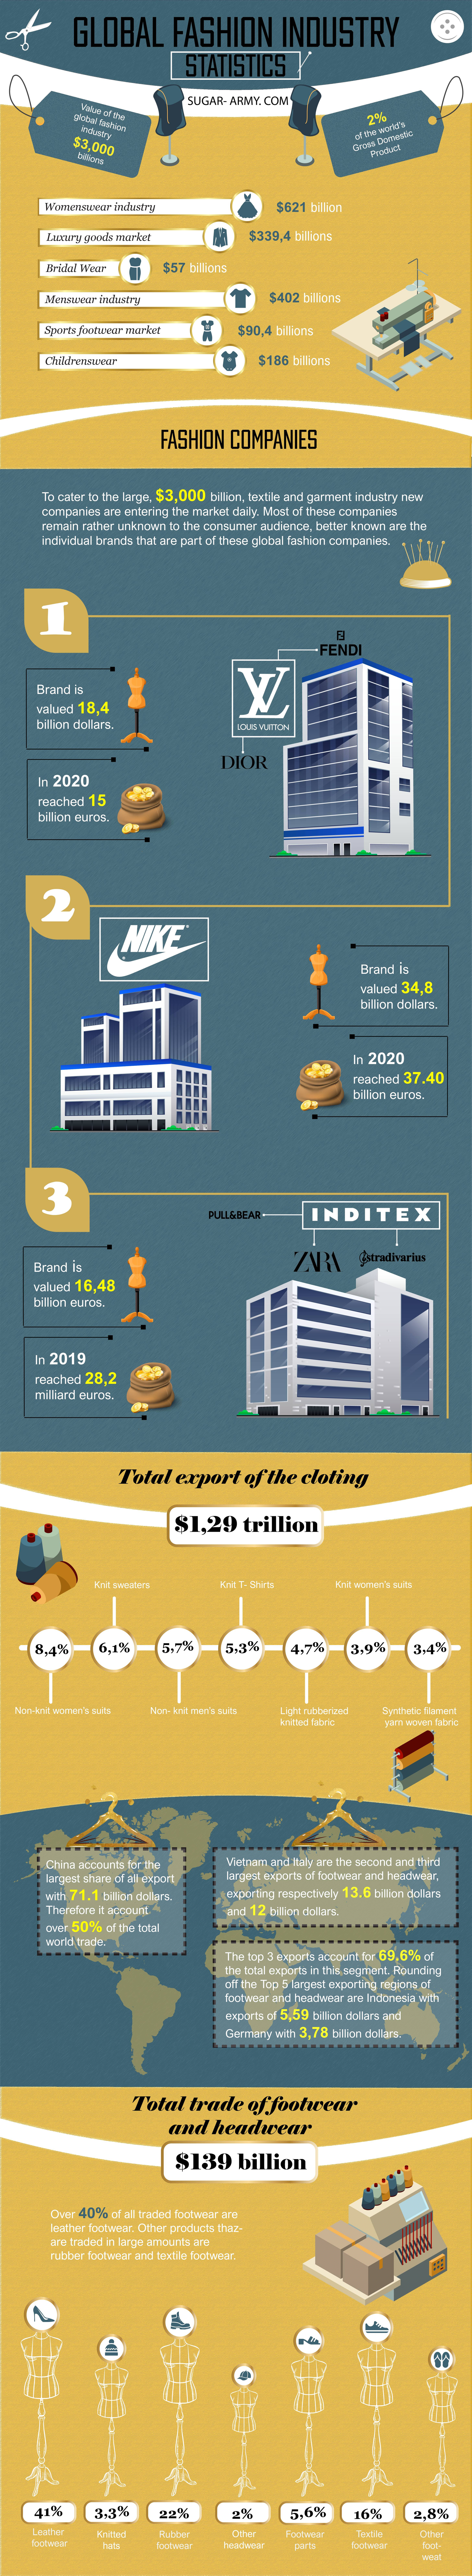 [Infographic] Global Fashion Industry